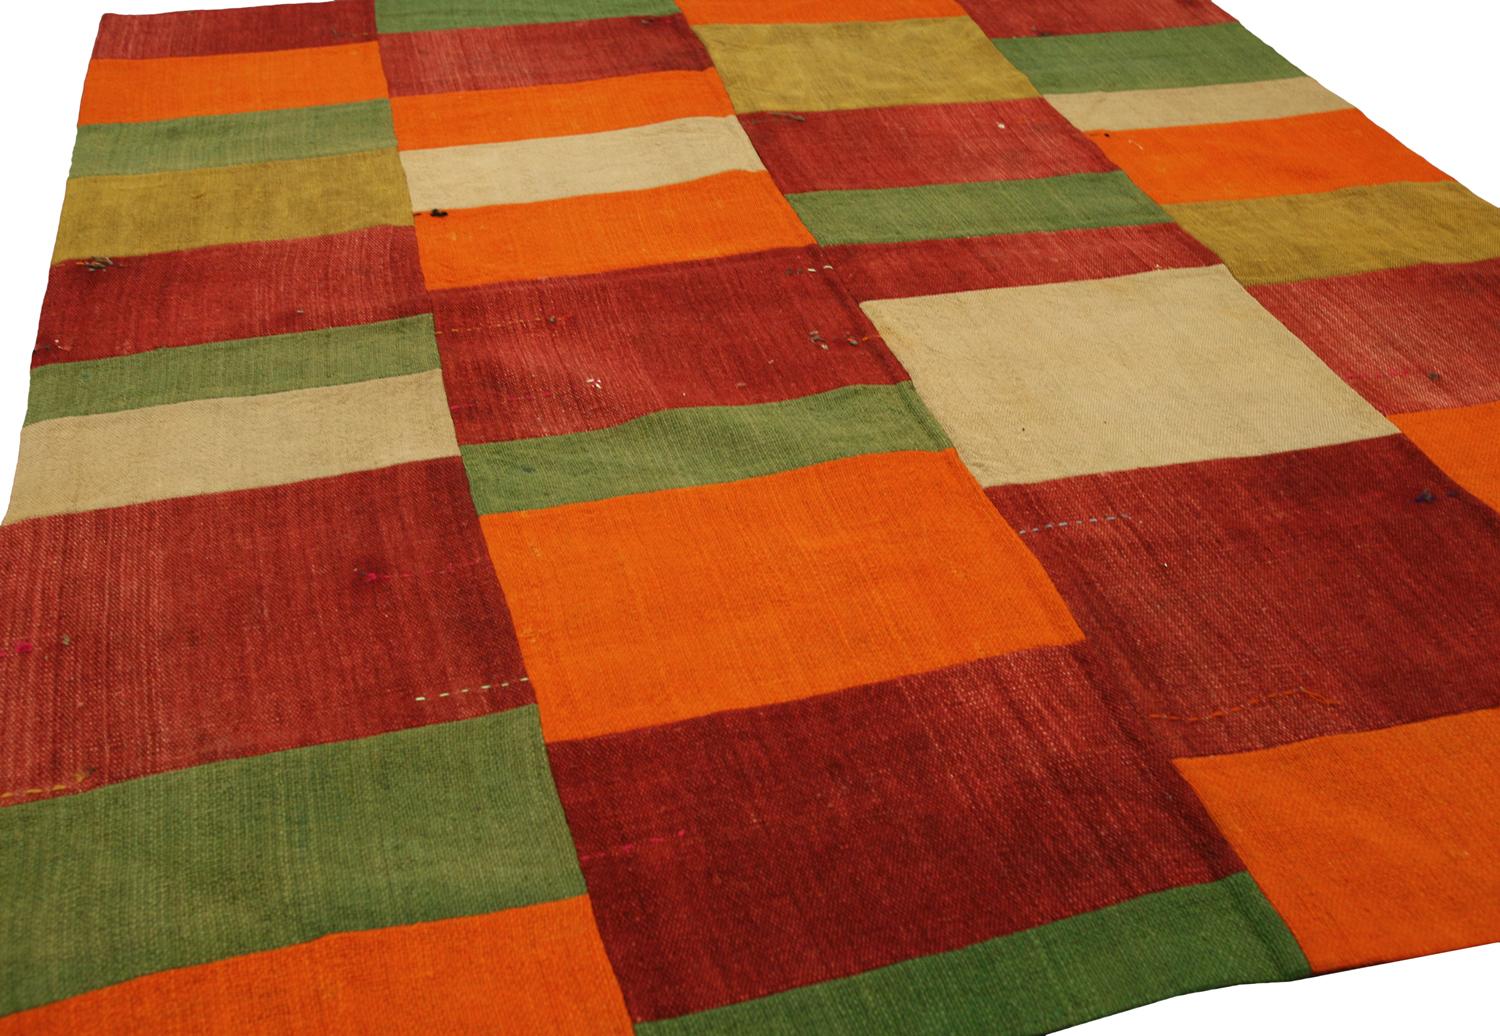 This is your chance to own a piece of history! This beautiful patchwork was woven in Turkey between 1950 and 1970, and its absolutely stunning. This piece can add a touch of luxury to your house. This piece is also very durable, so you can enjoy it